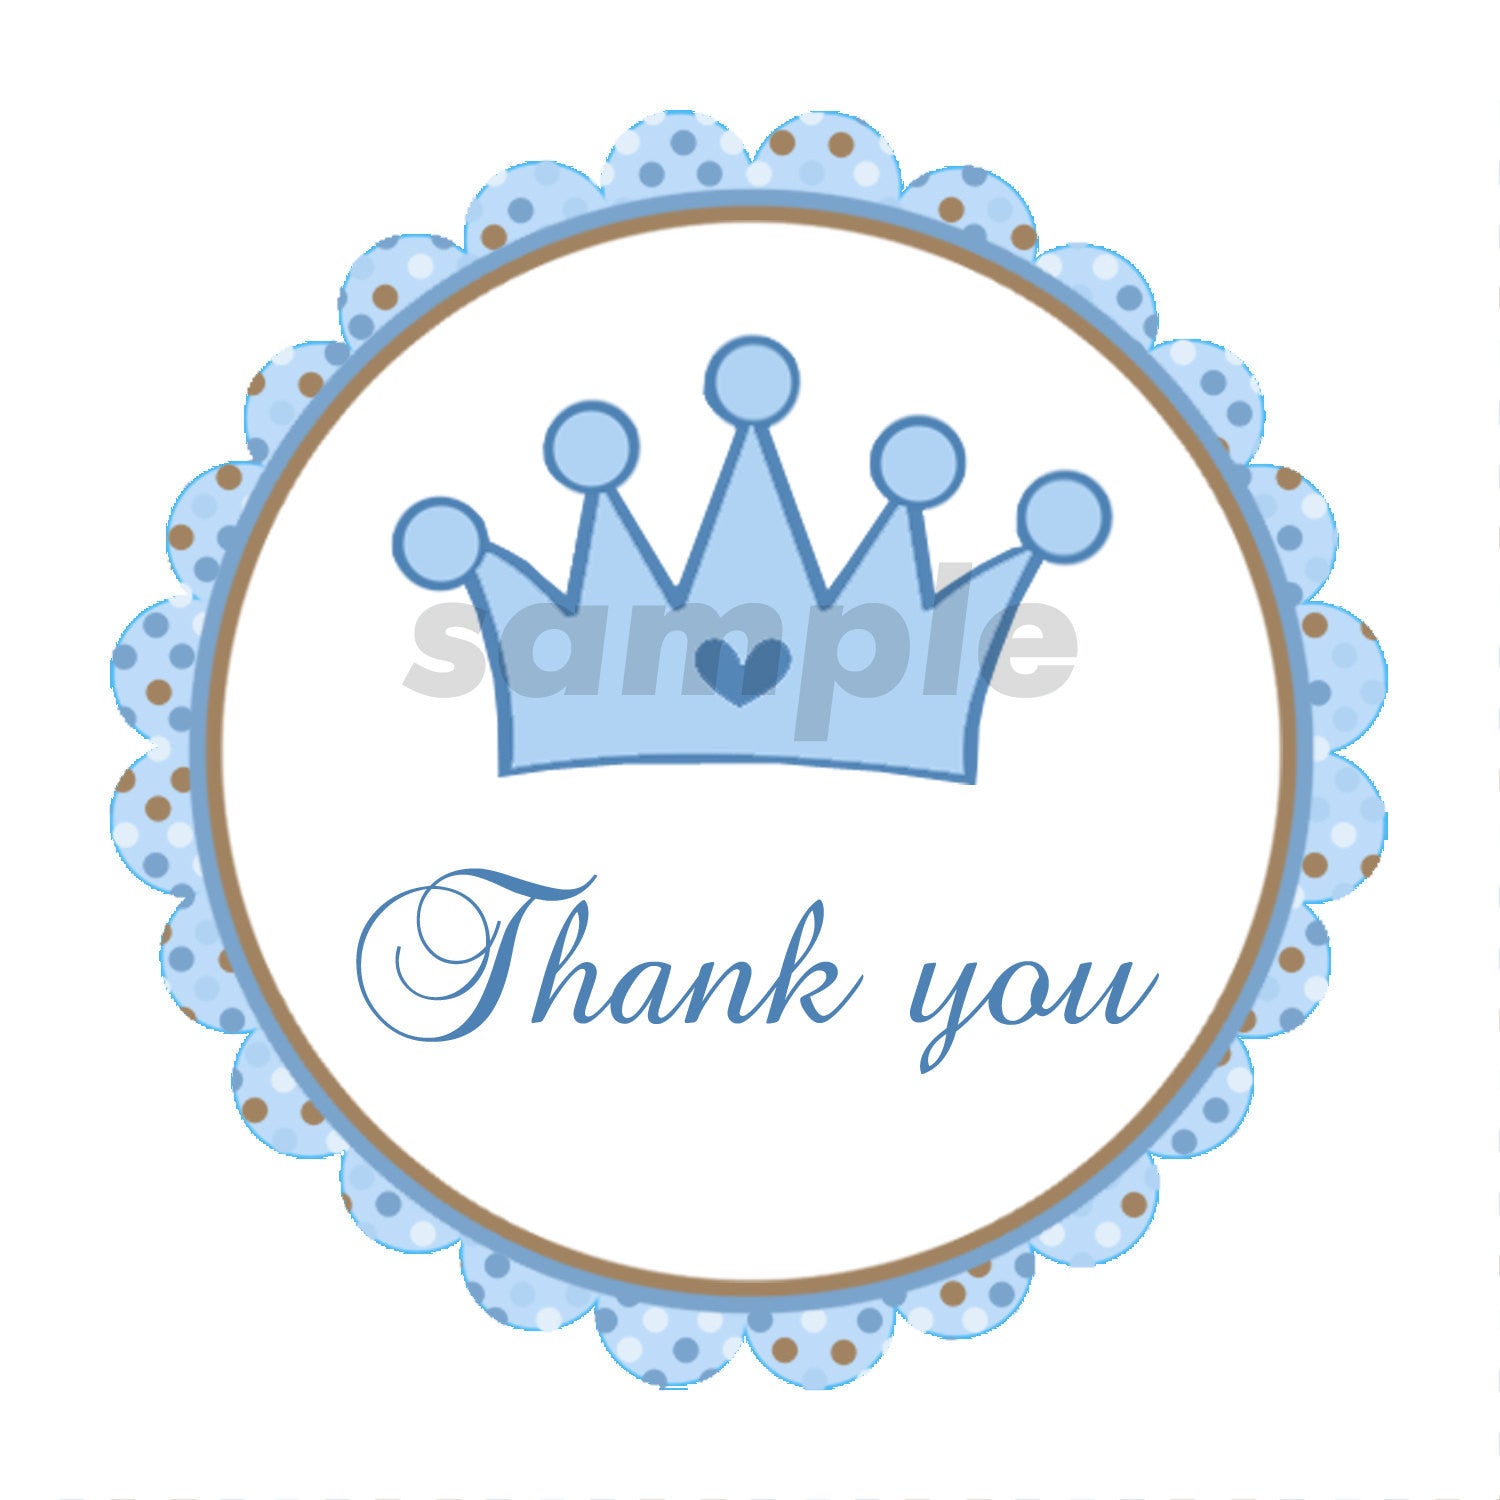 Prince Labels - Prince Tags Prince Thank You Stickers Prince Baby Shower Labels Blue Brown Prince Crown - Prince Favor Tag INSTANT DOWNLOAD